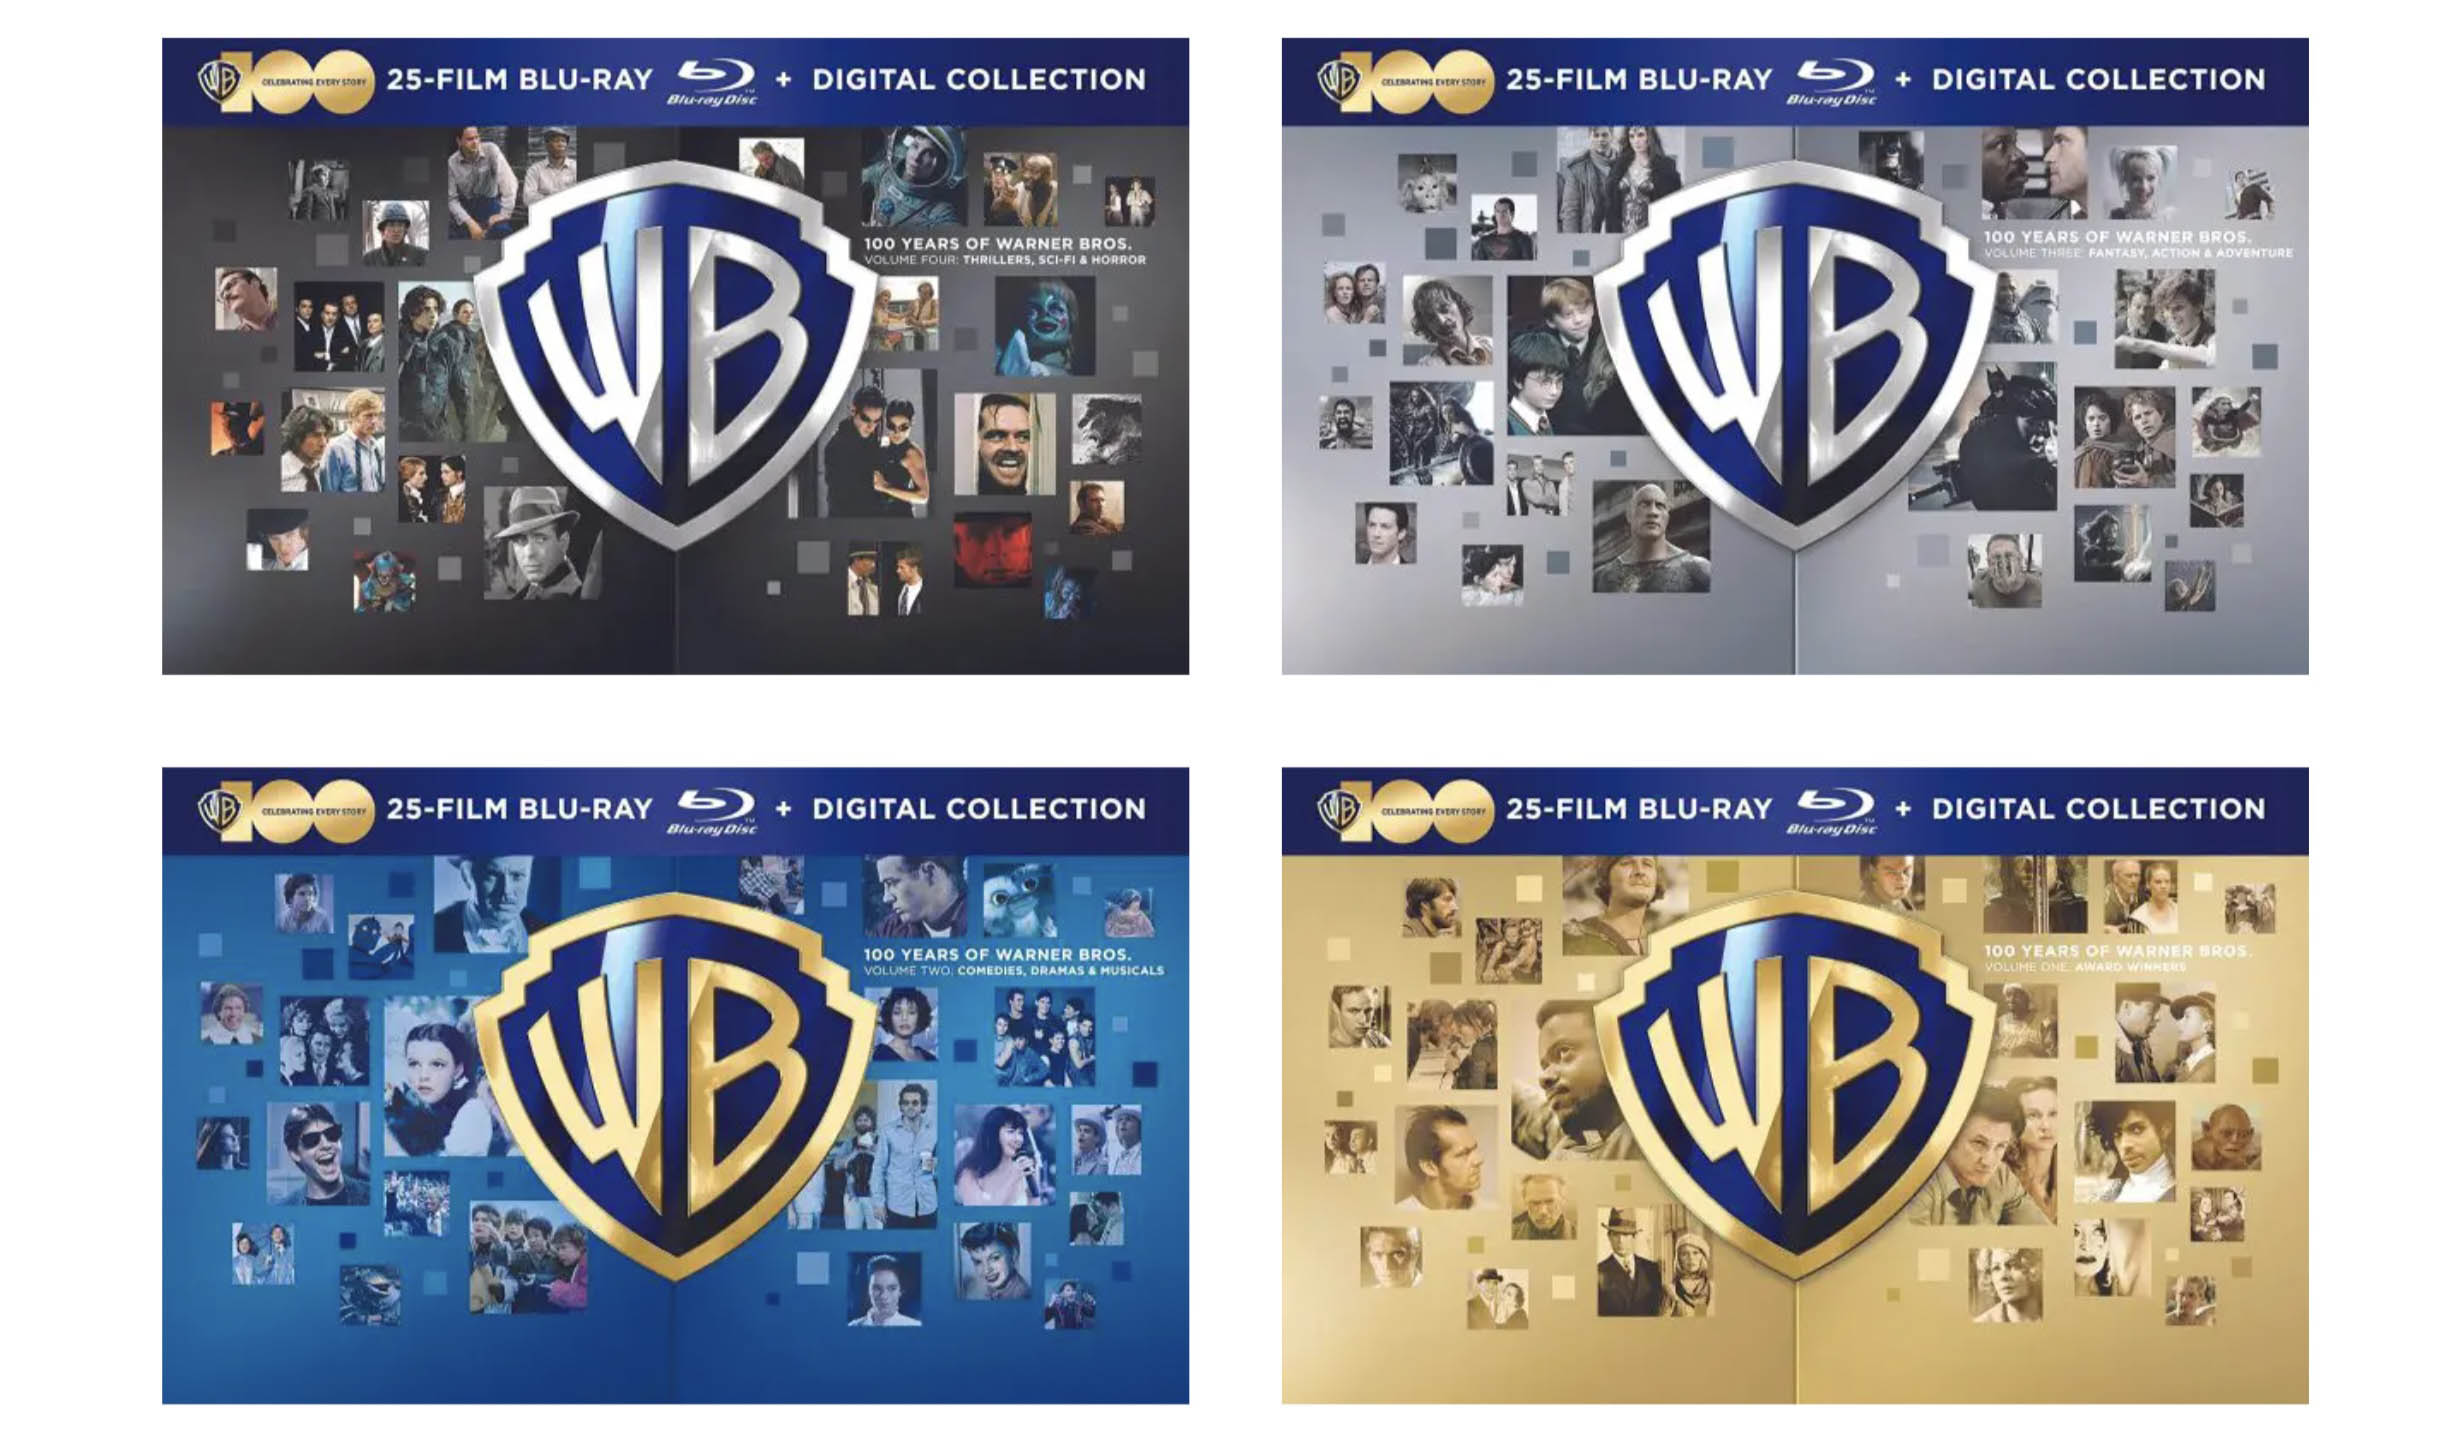 Warner Bros. 100 25-Film Blu-ray collections